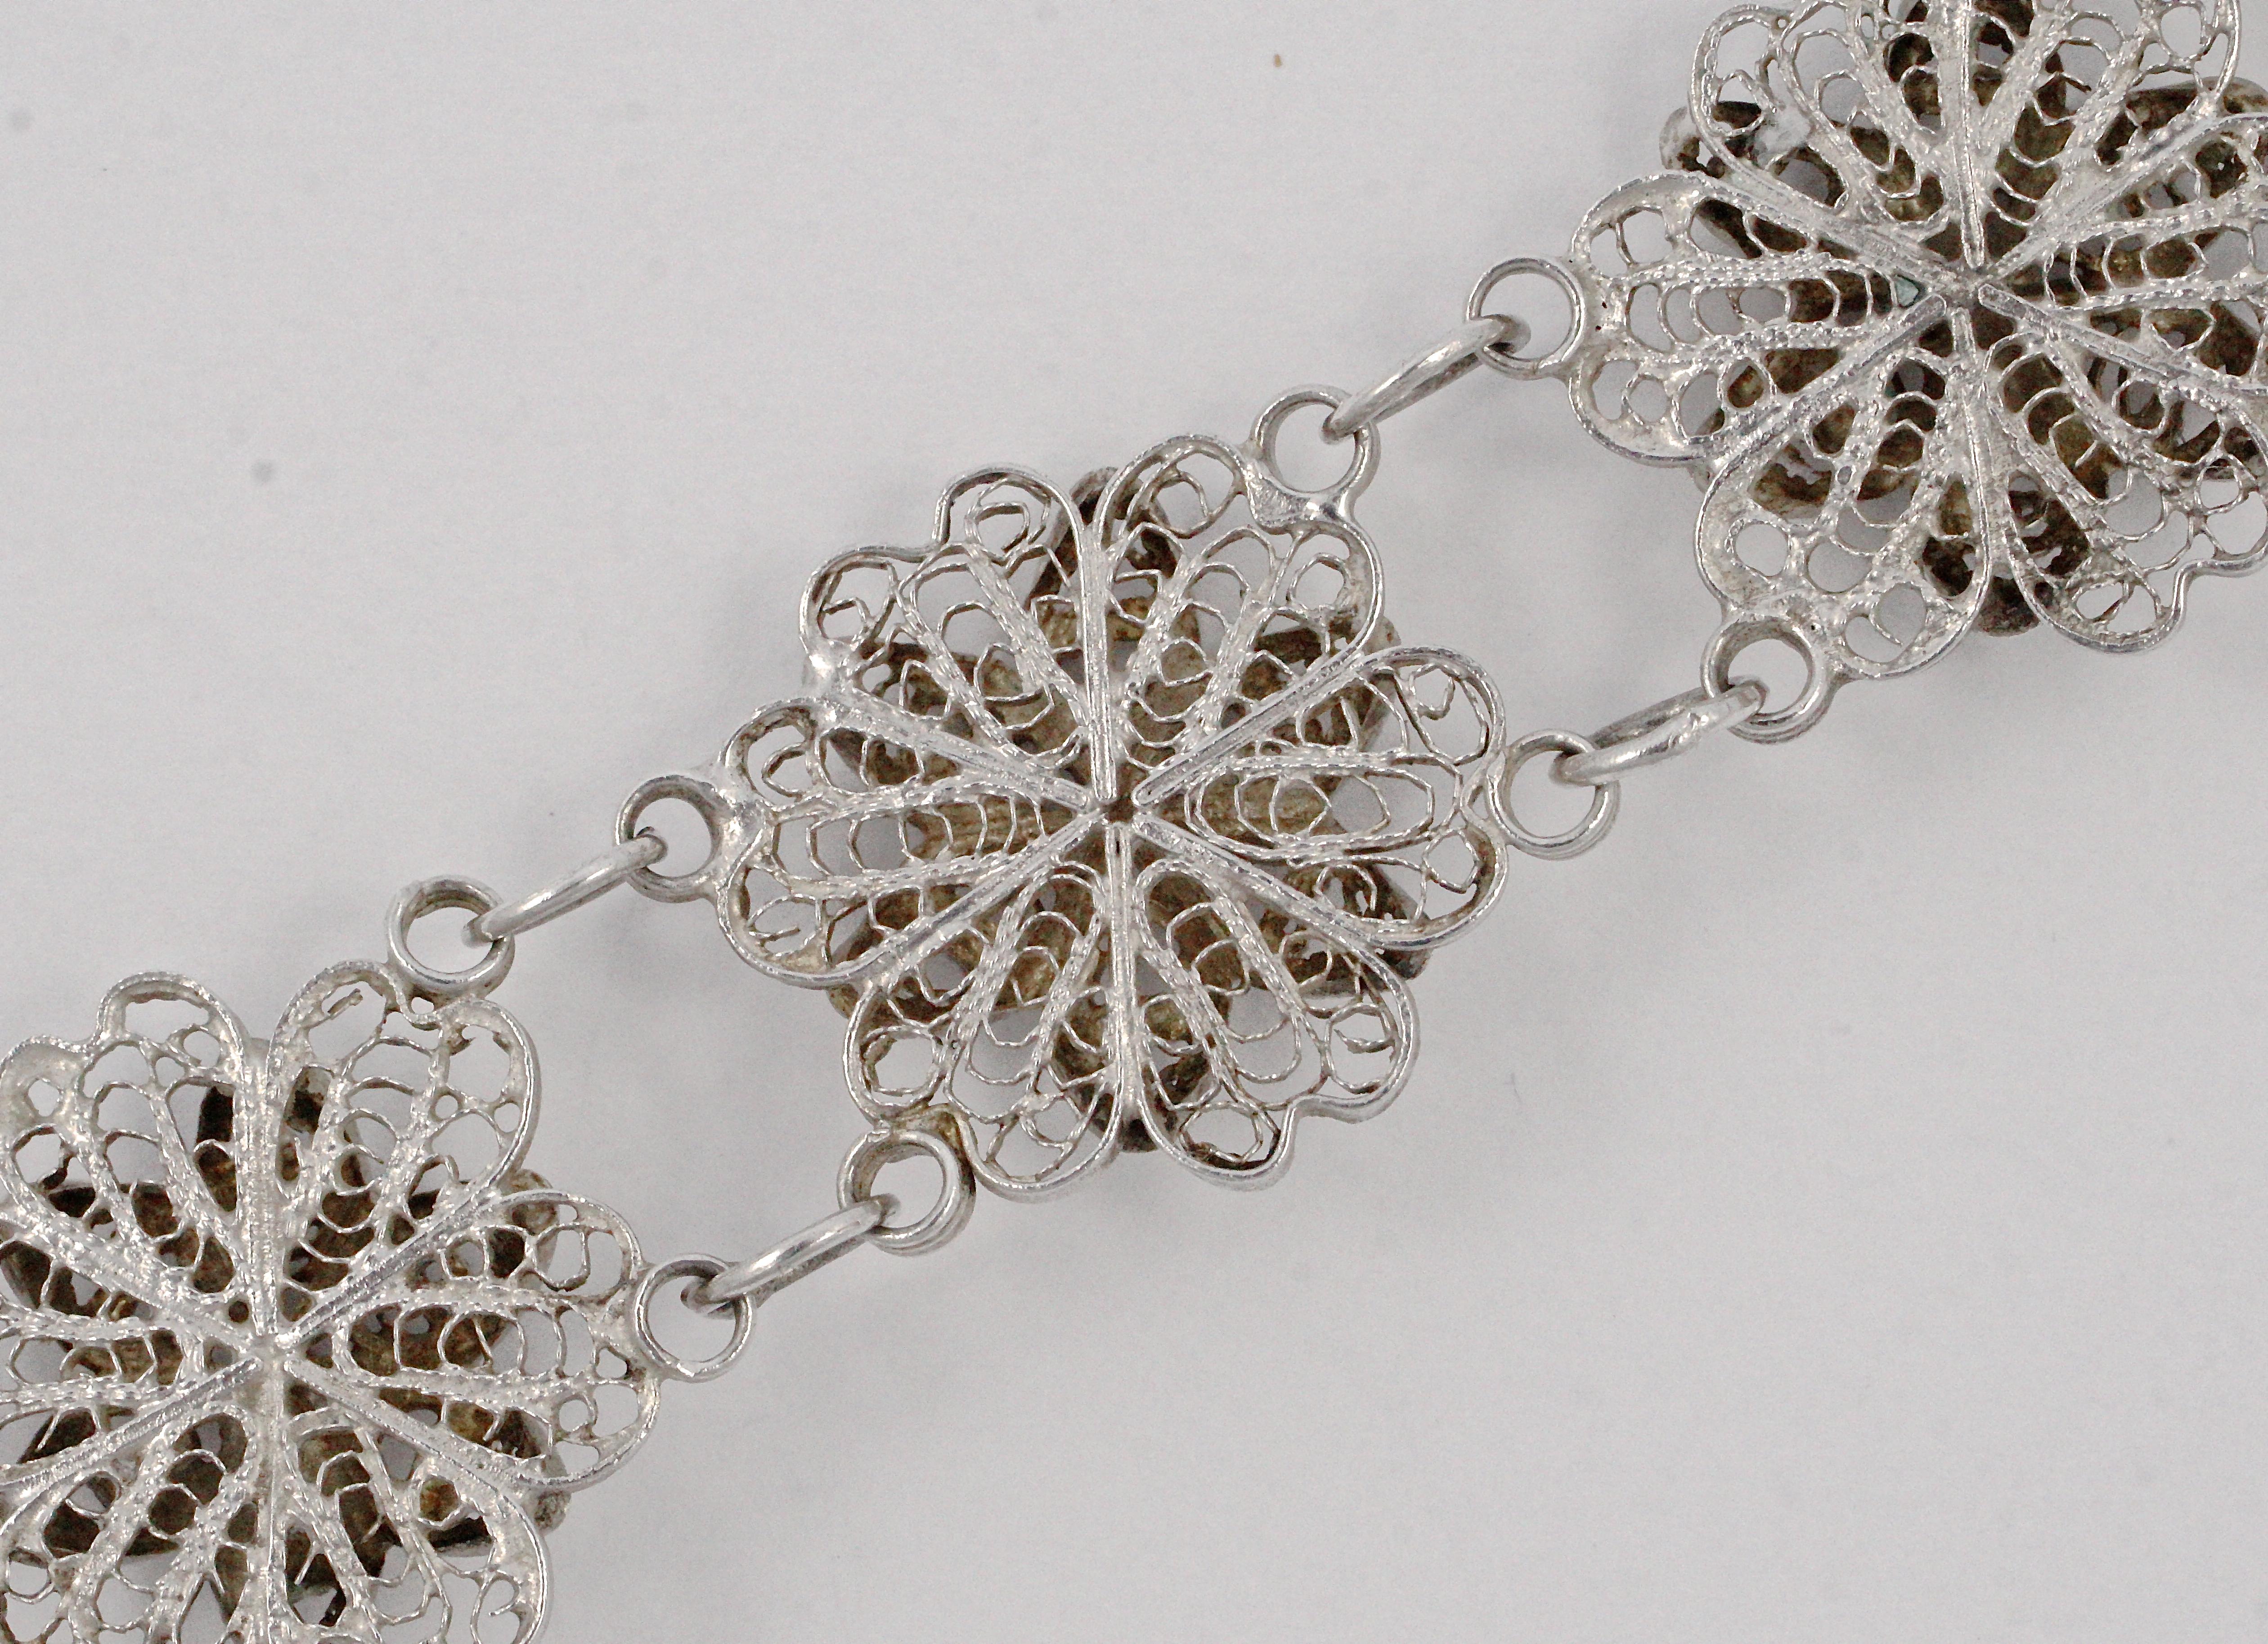 Silver Filigree Flower Design Link Bracelet circa 1930s In Good Condition For Sale In London, GB